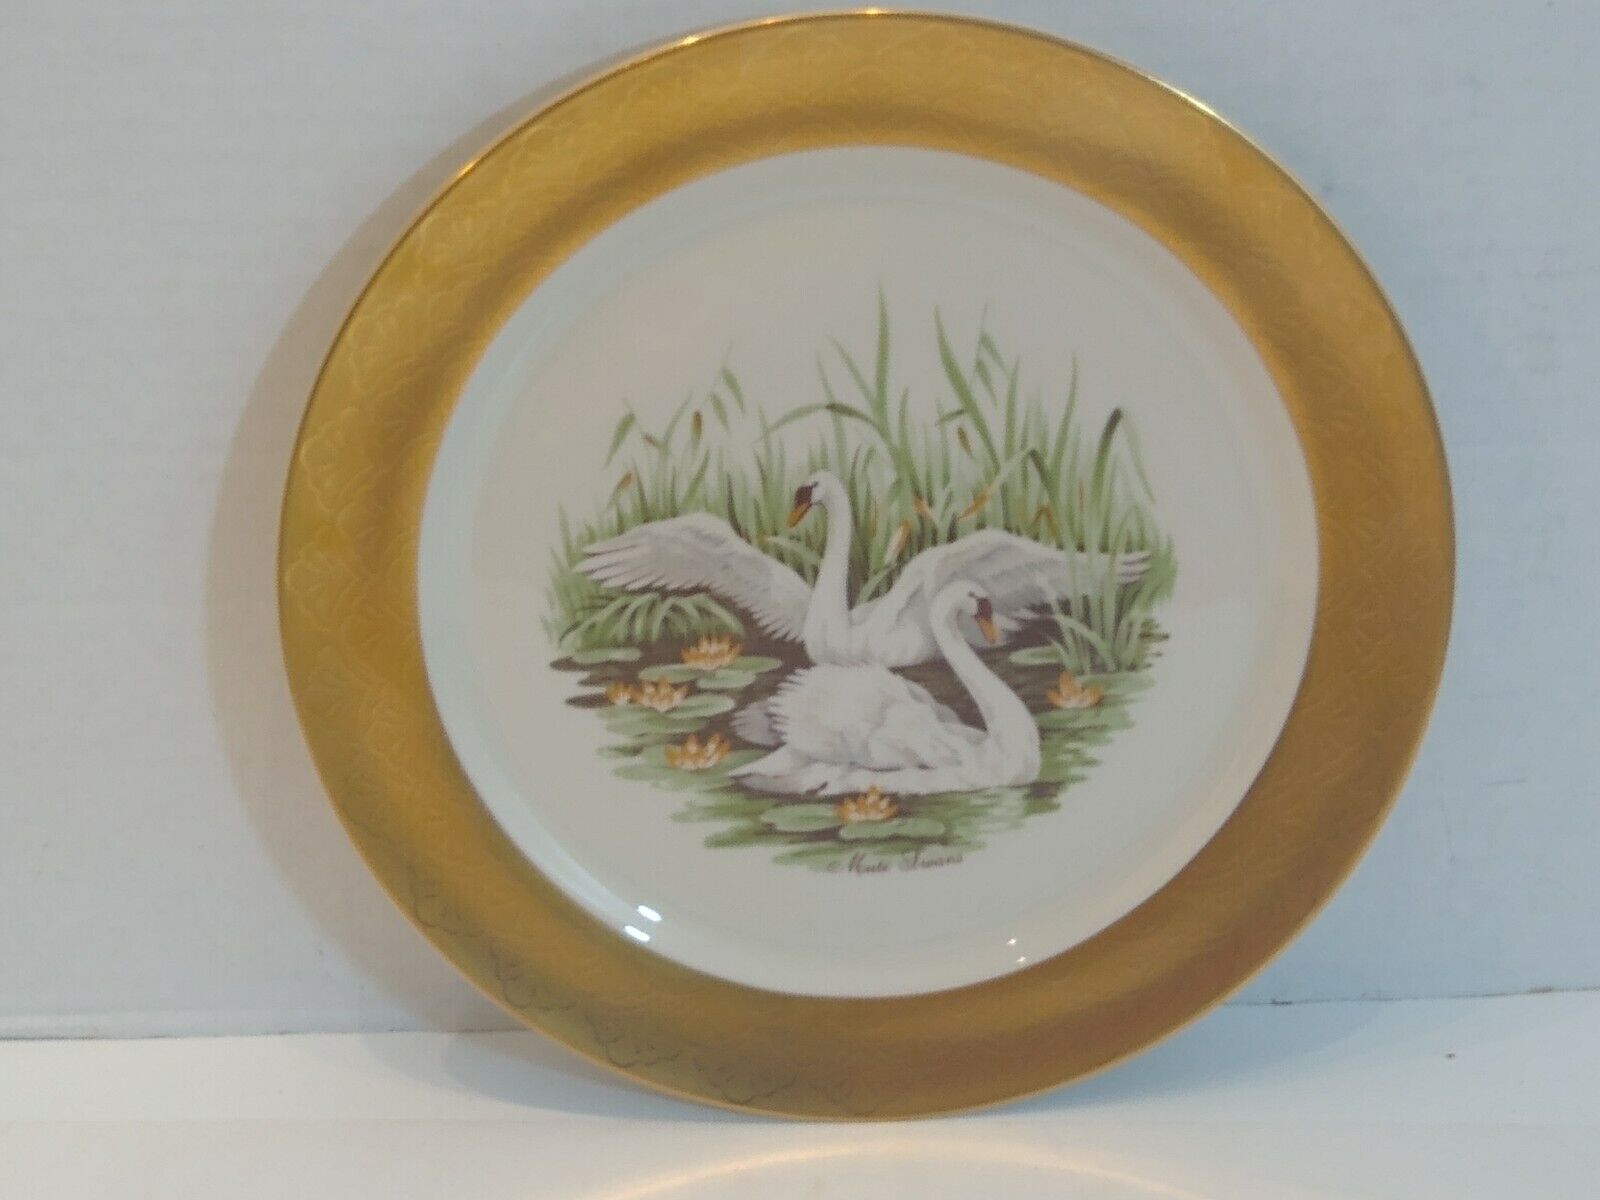 Vintage Pickard China U.S.A. Gold Rimmed Cabinet Plate with Swans Center